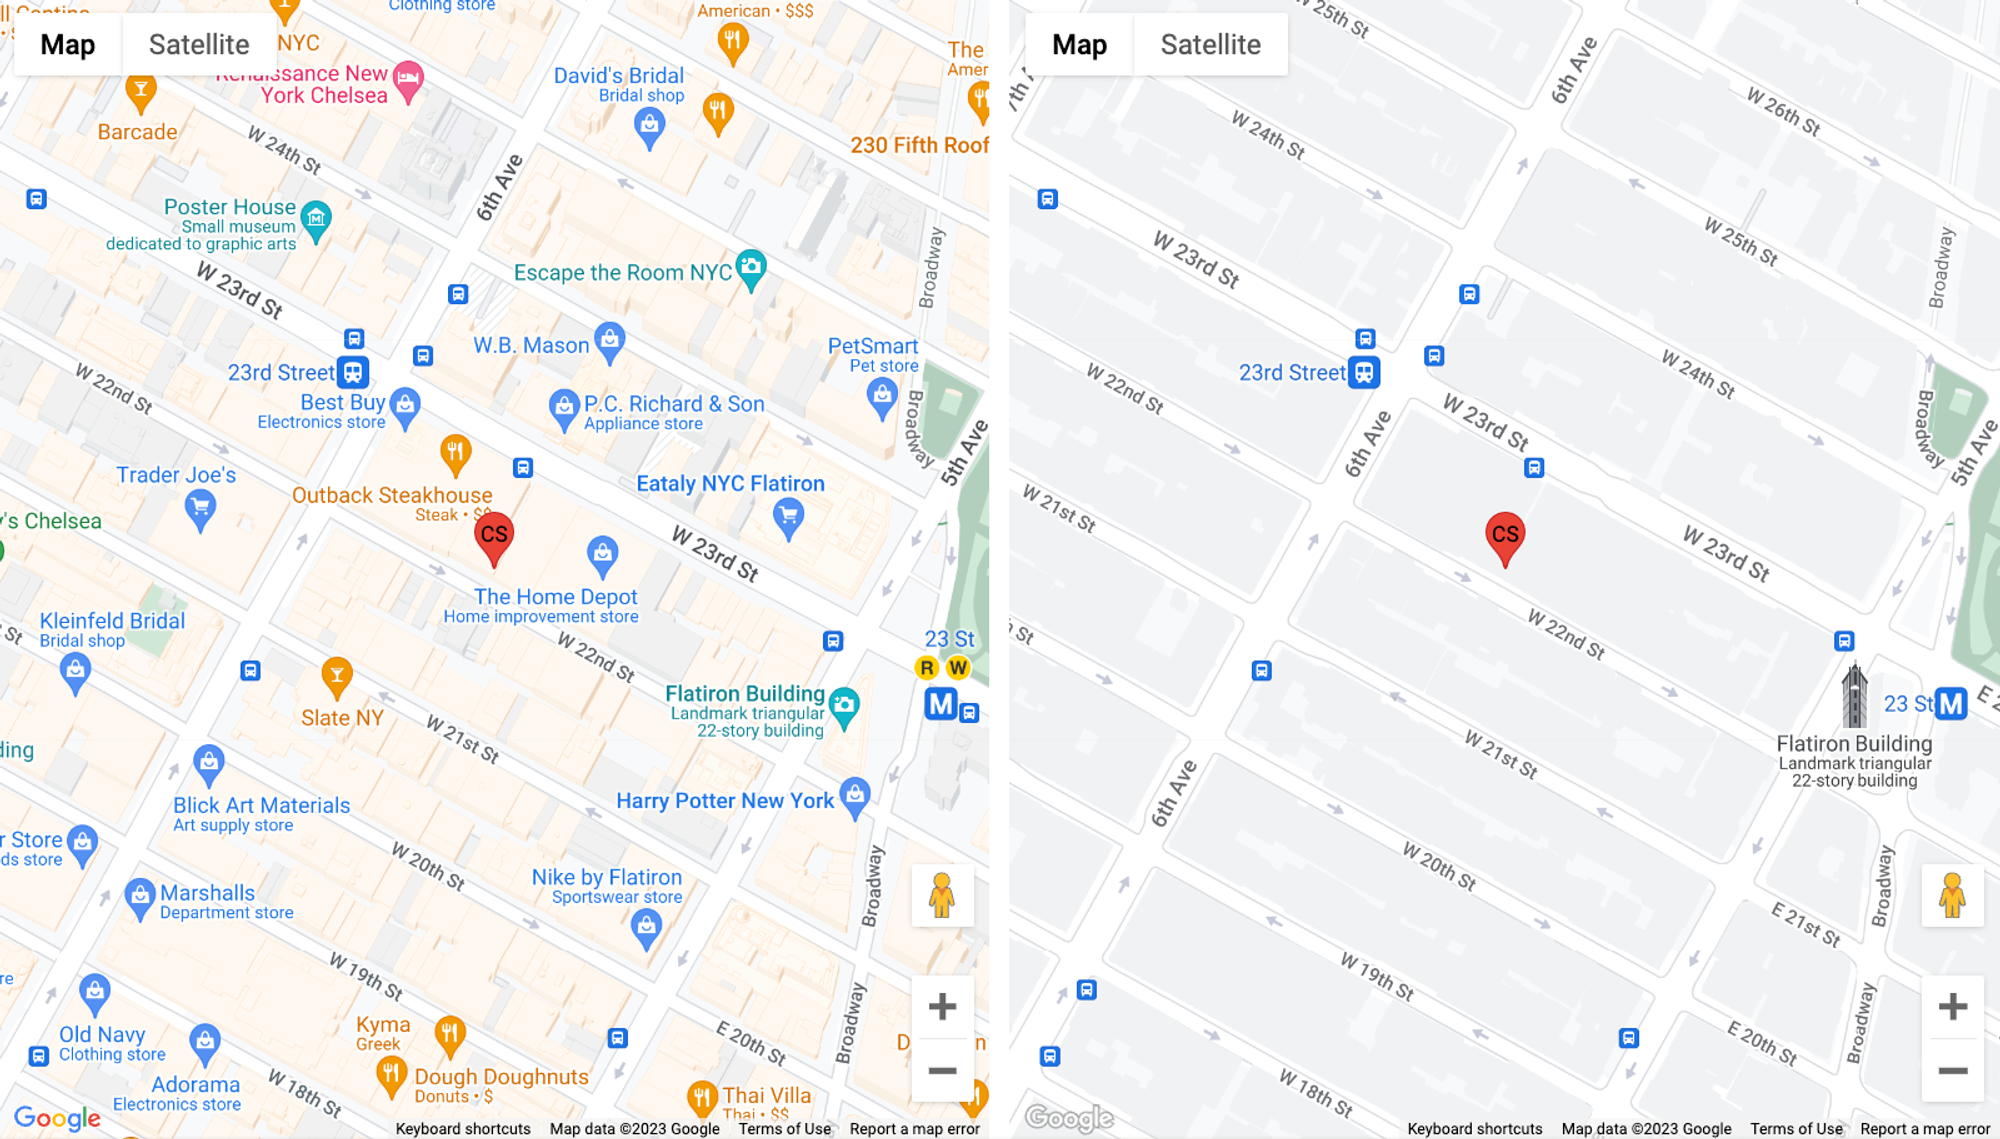 Left: the default Google map.
Right: a retail-optimized Google Map, explained in more detail in the next chapter, .